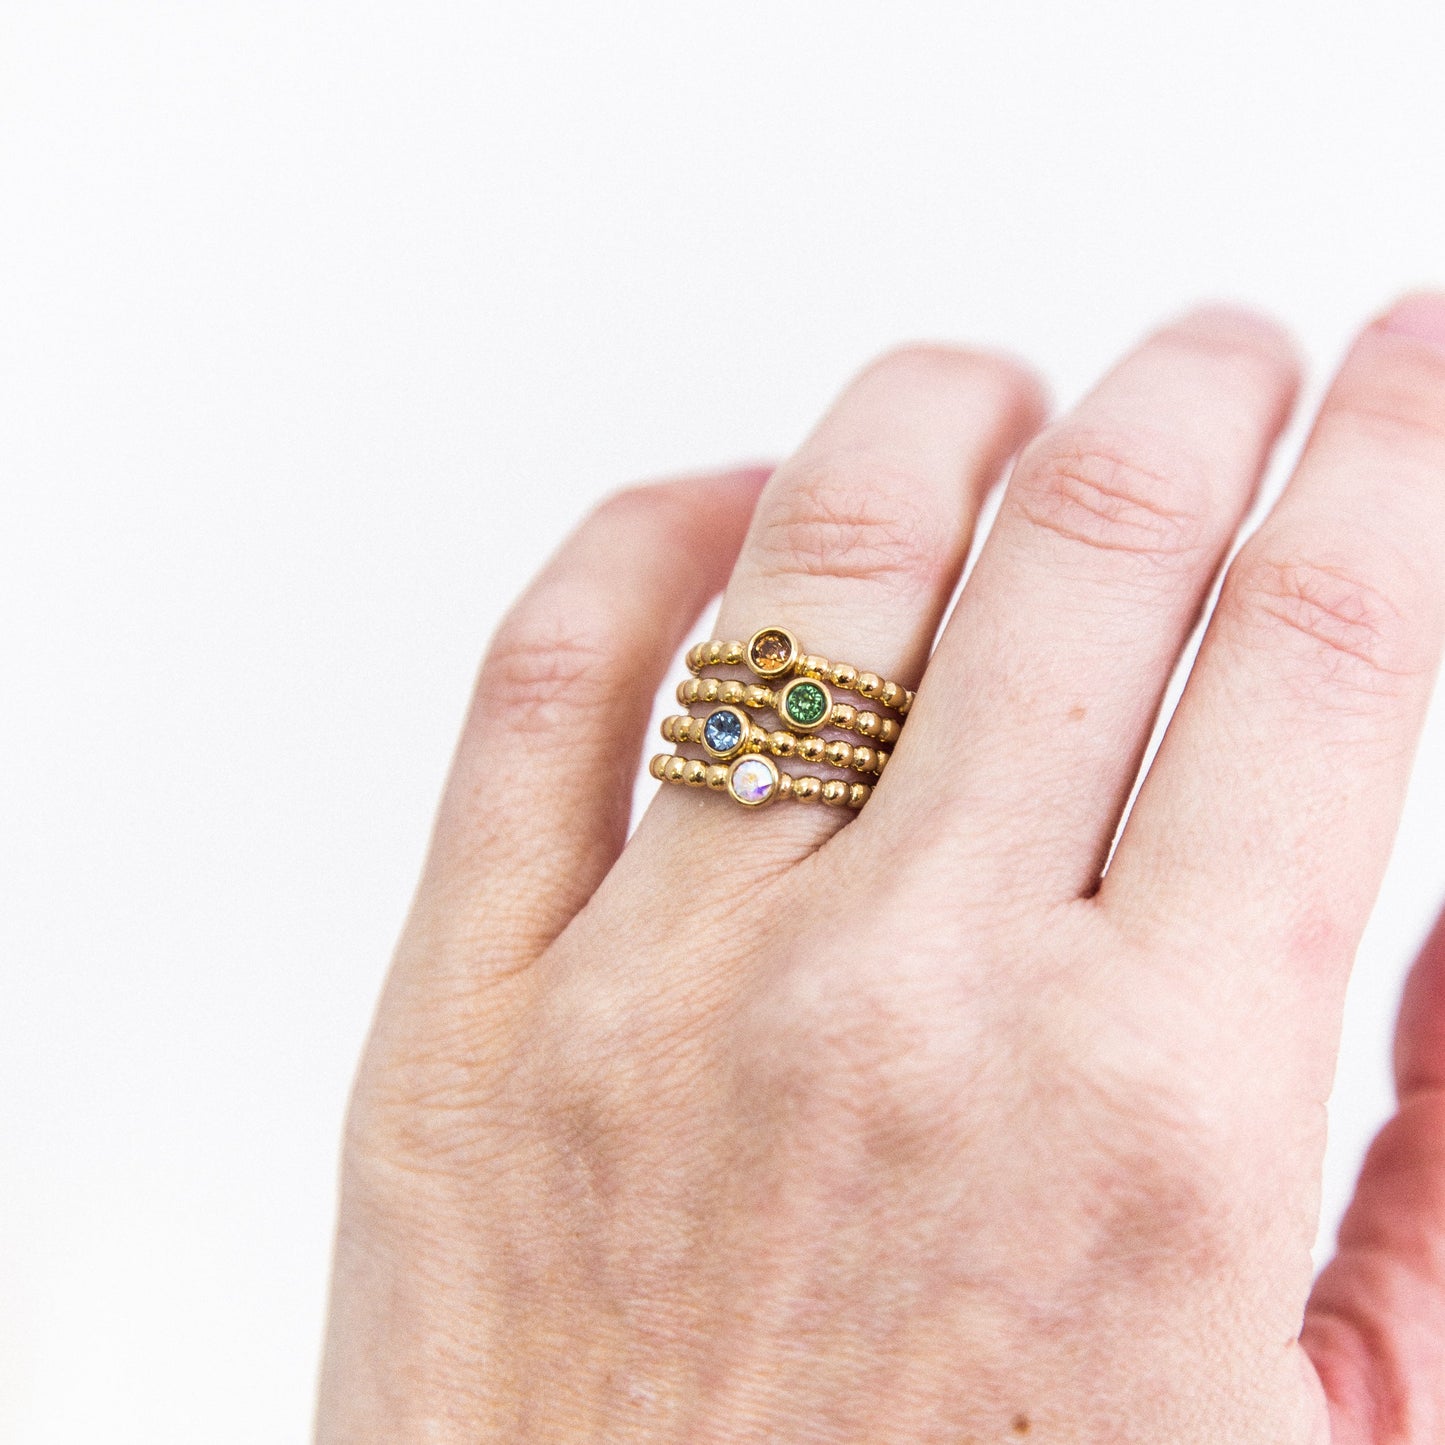 Matino Deluxe Ring in Rose Gold - Aqua